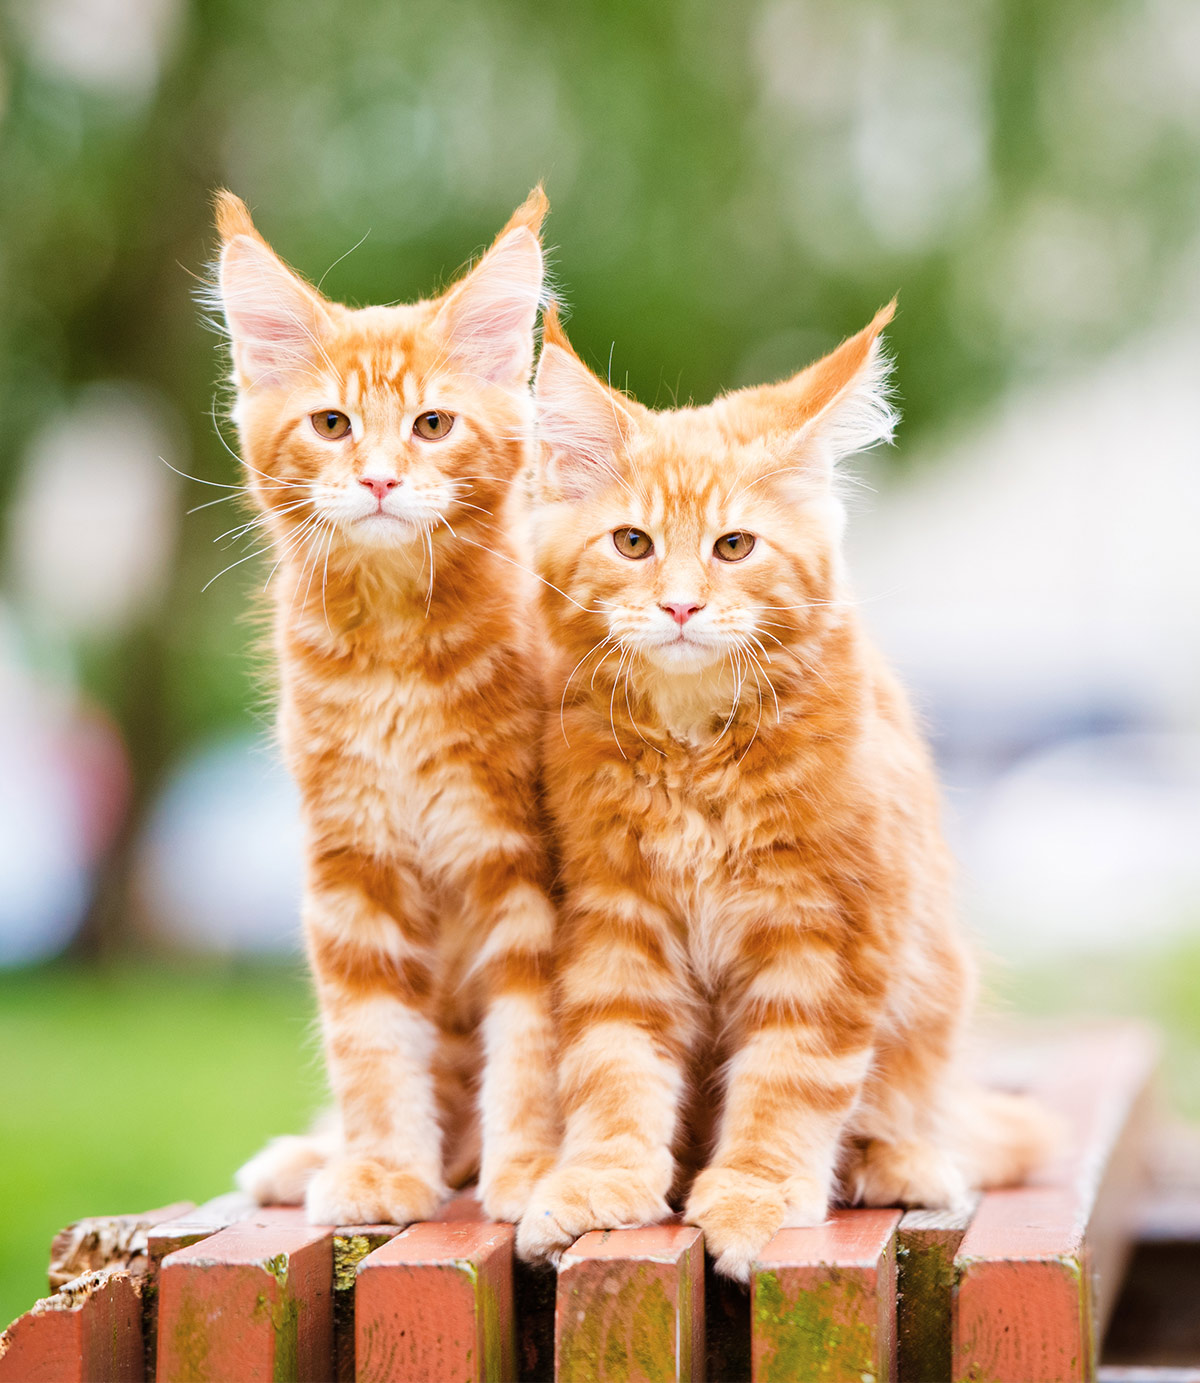 Orange pictures of Maine Coon cats